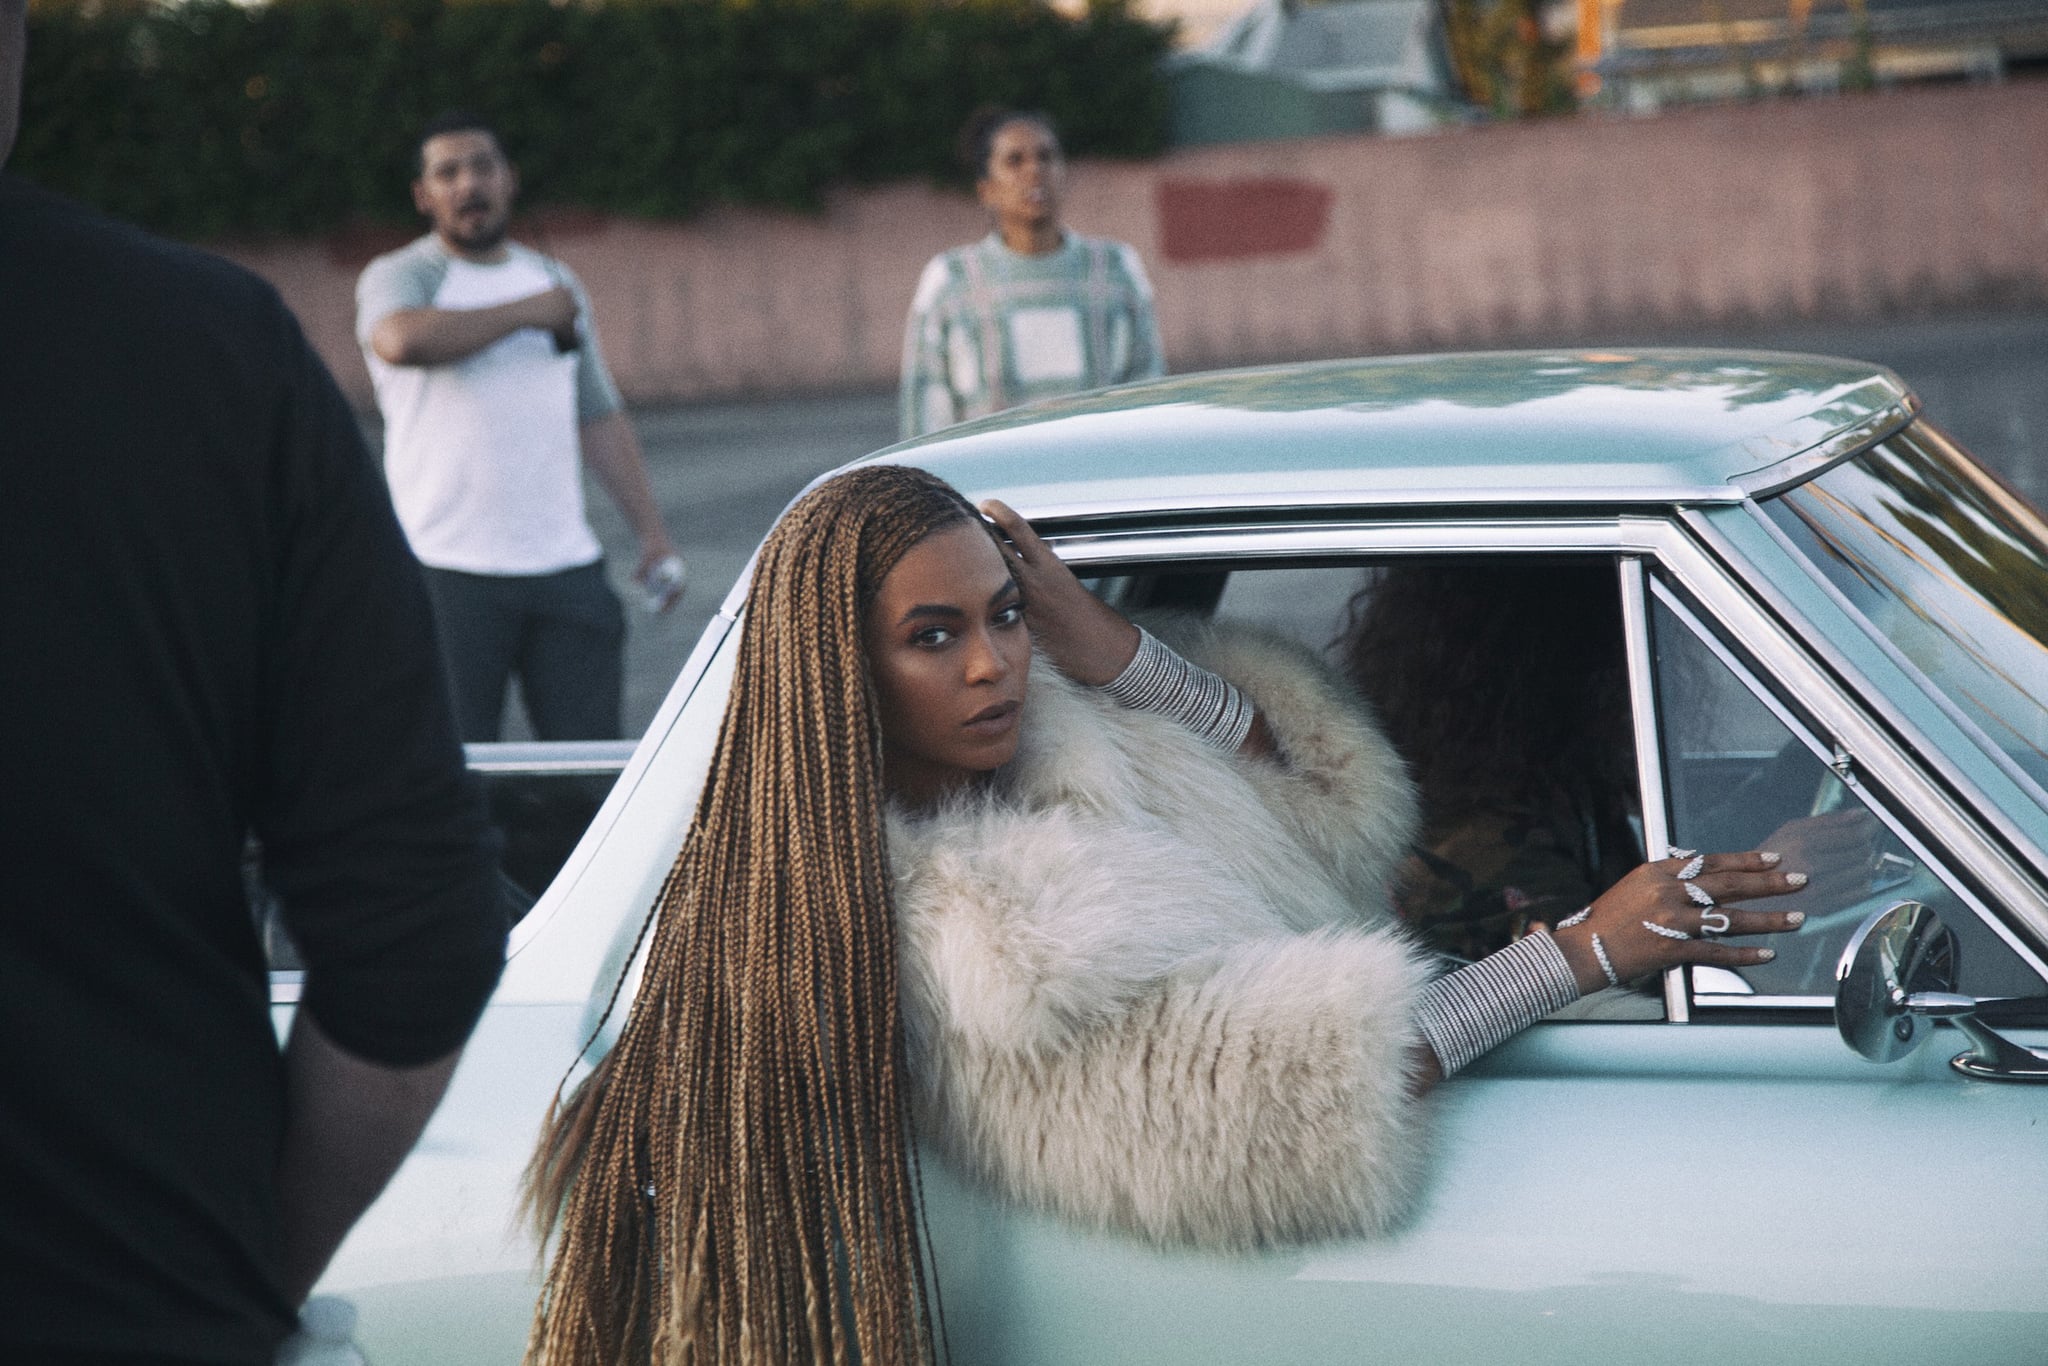 formation by beyonce mp3 download